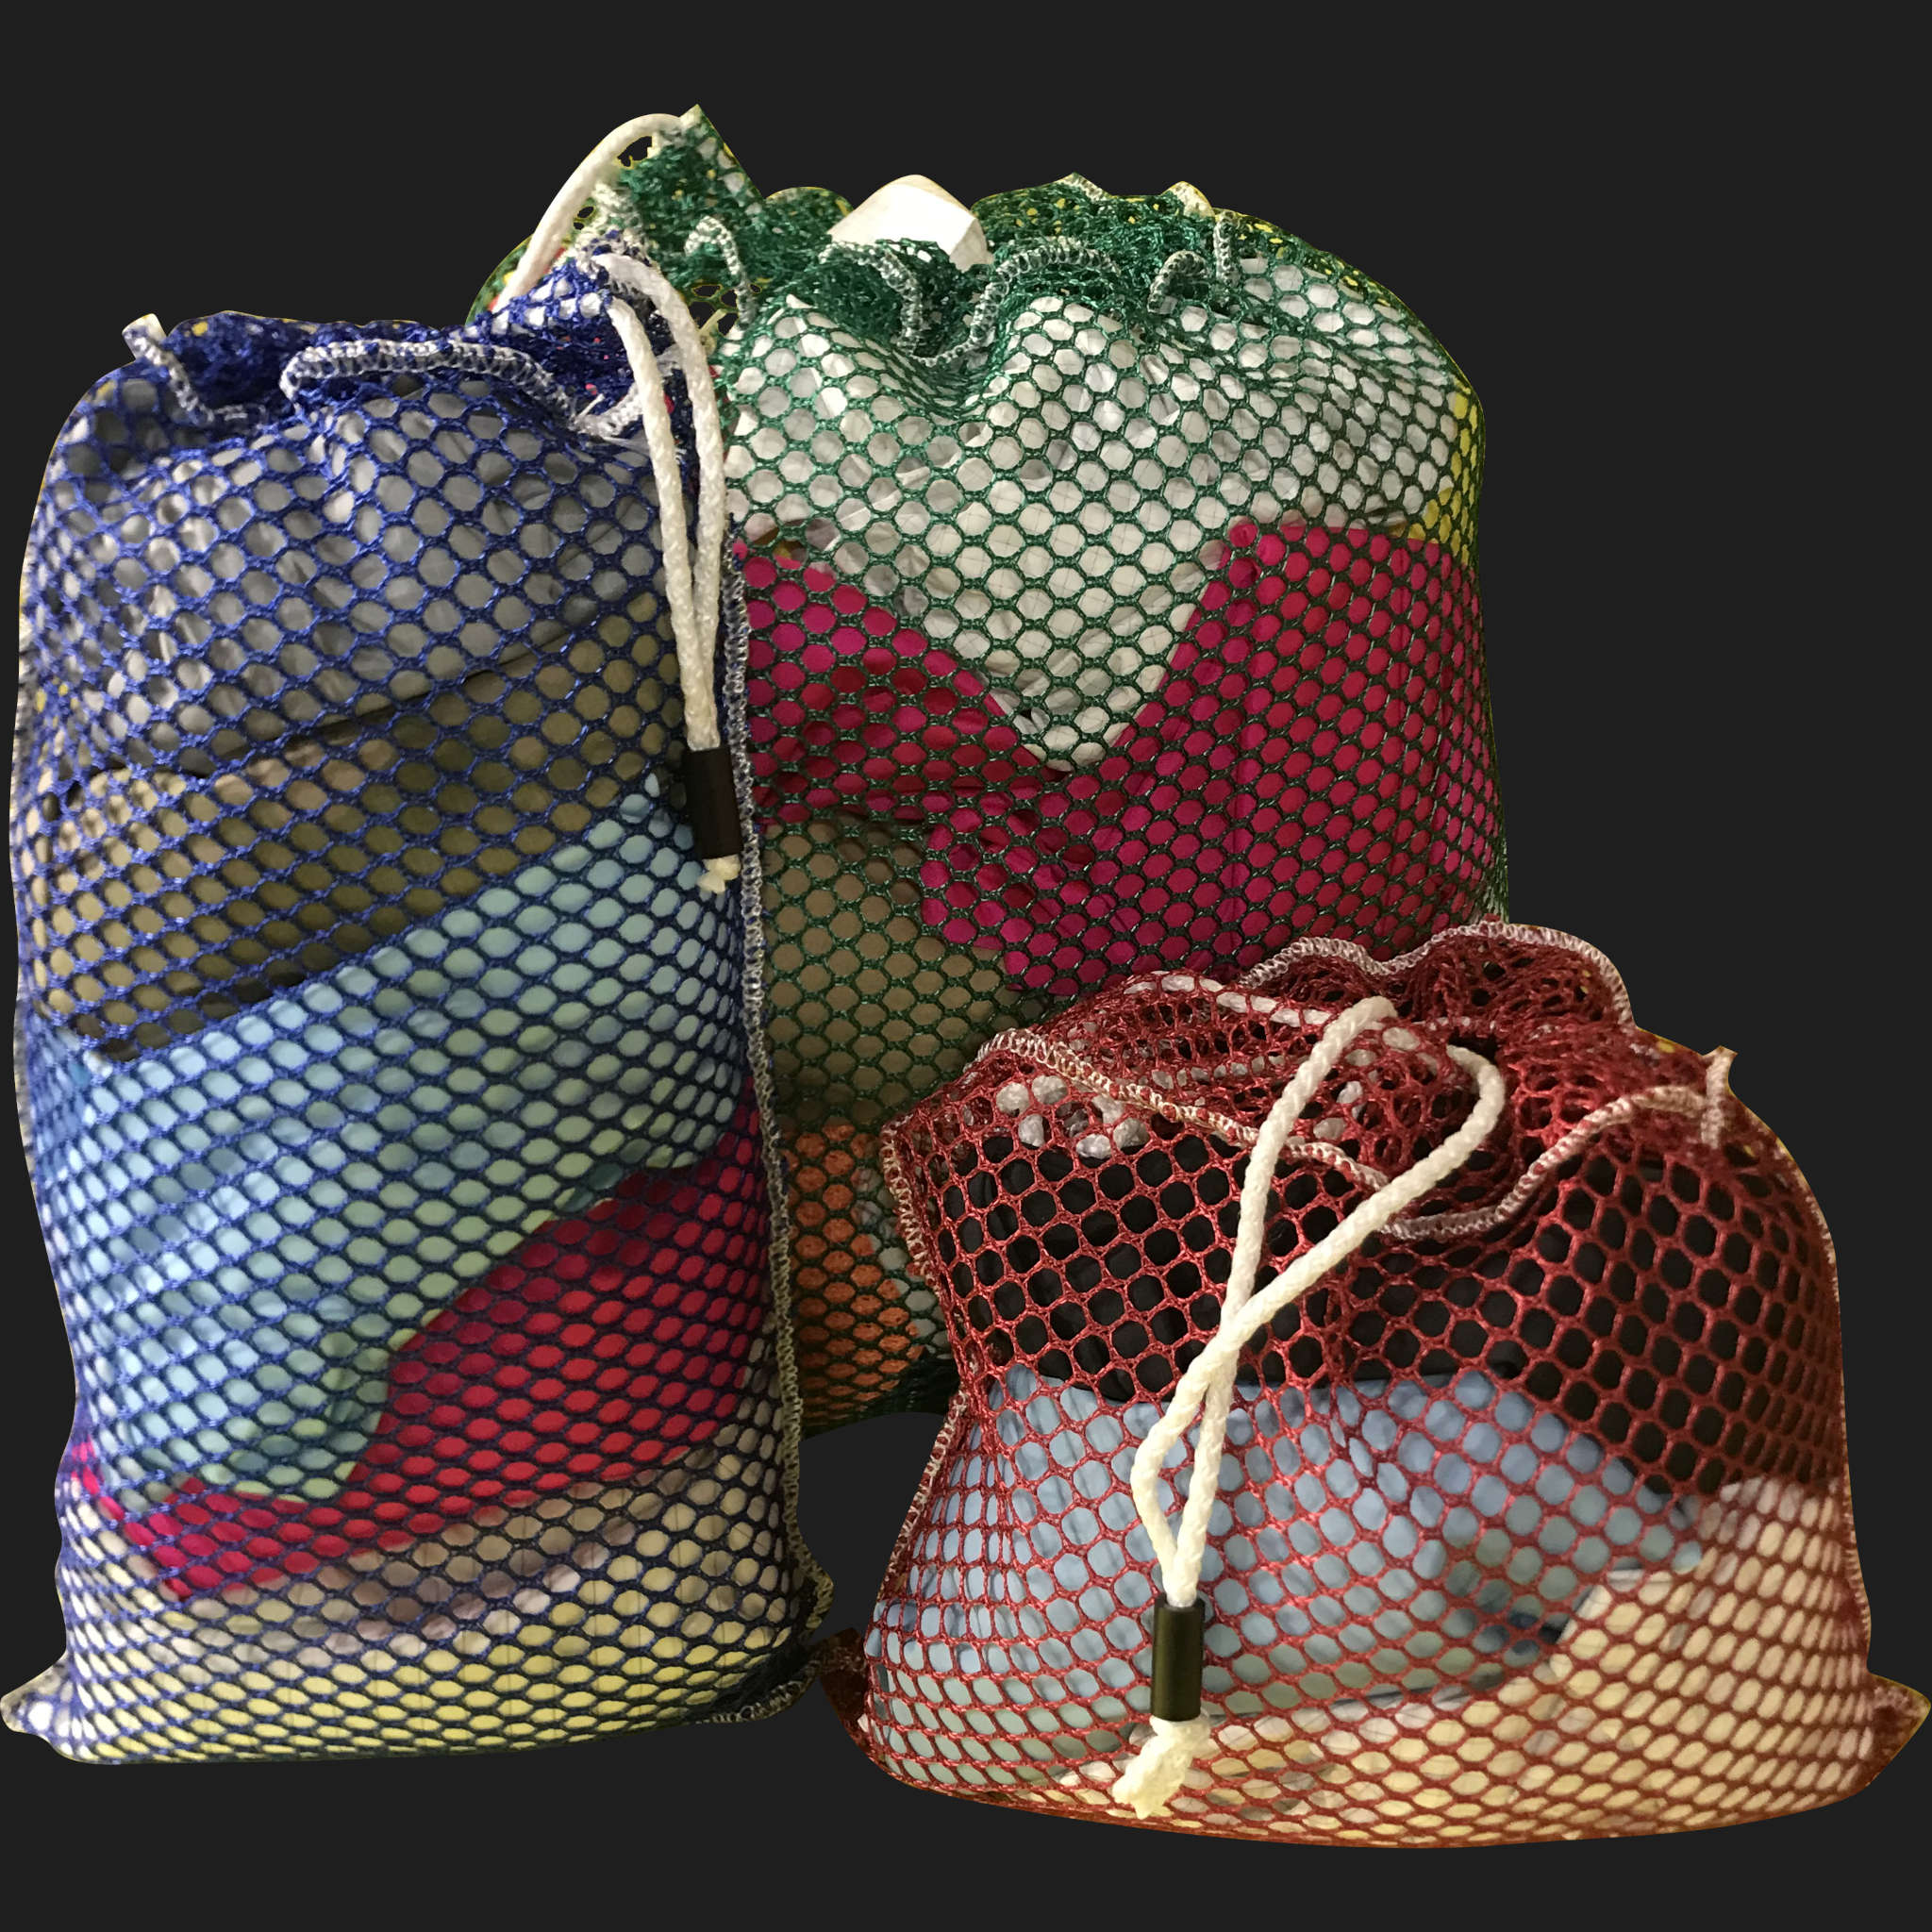 34" x 60" Customized Mesh-Net-Laundry Bags Heavy Duty with Cord and barrellock closure